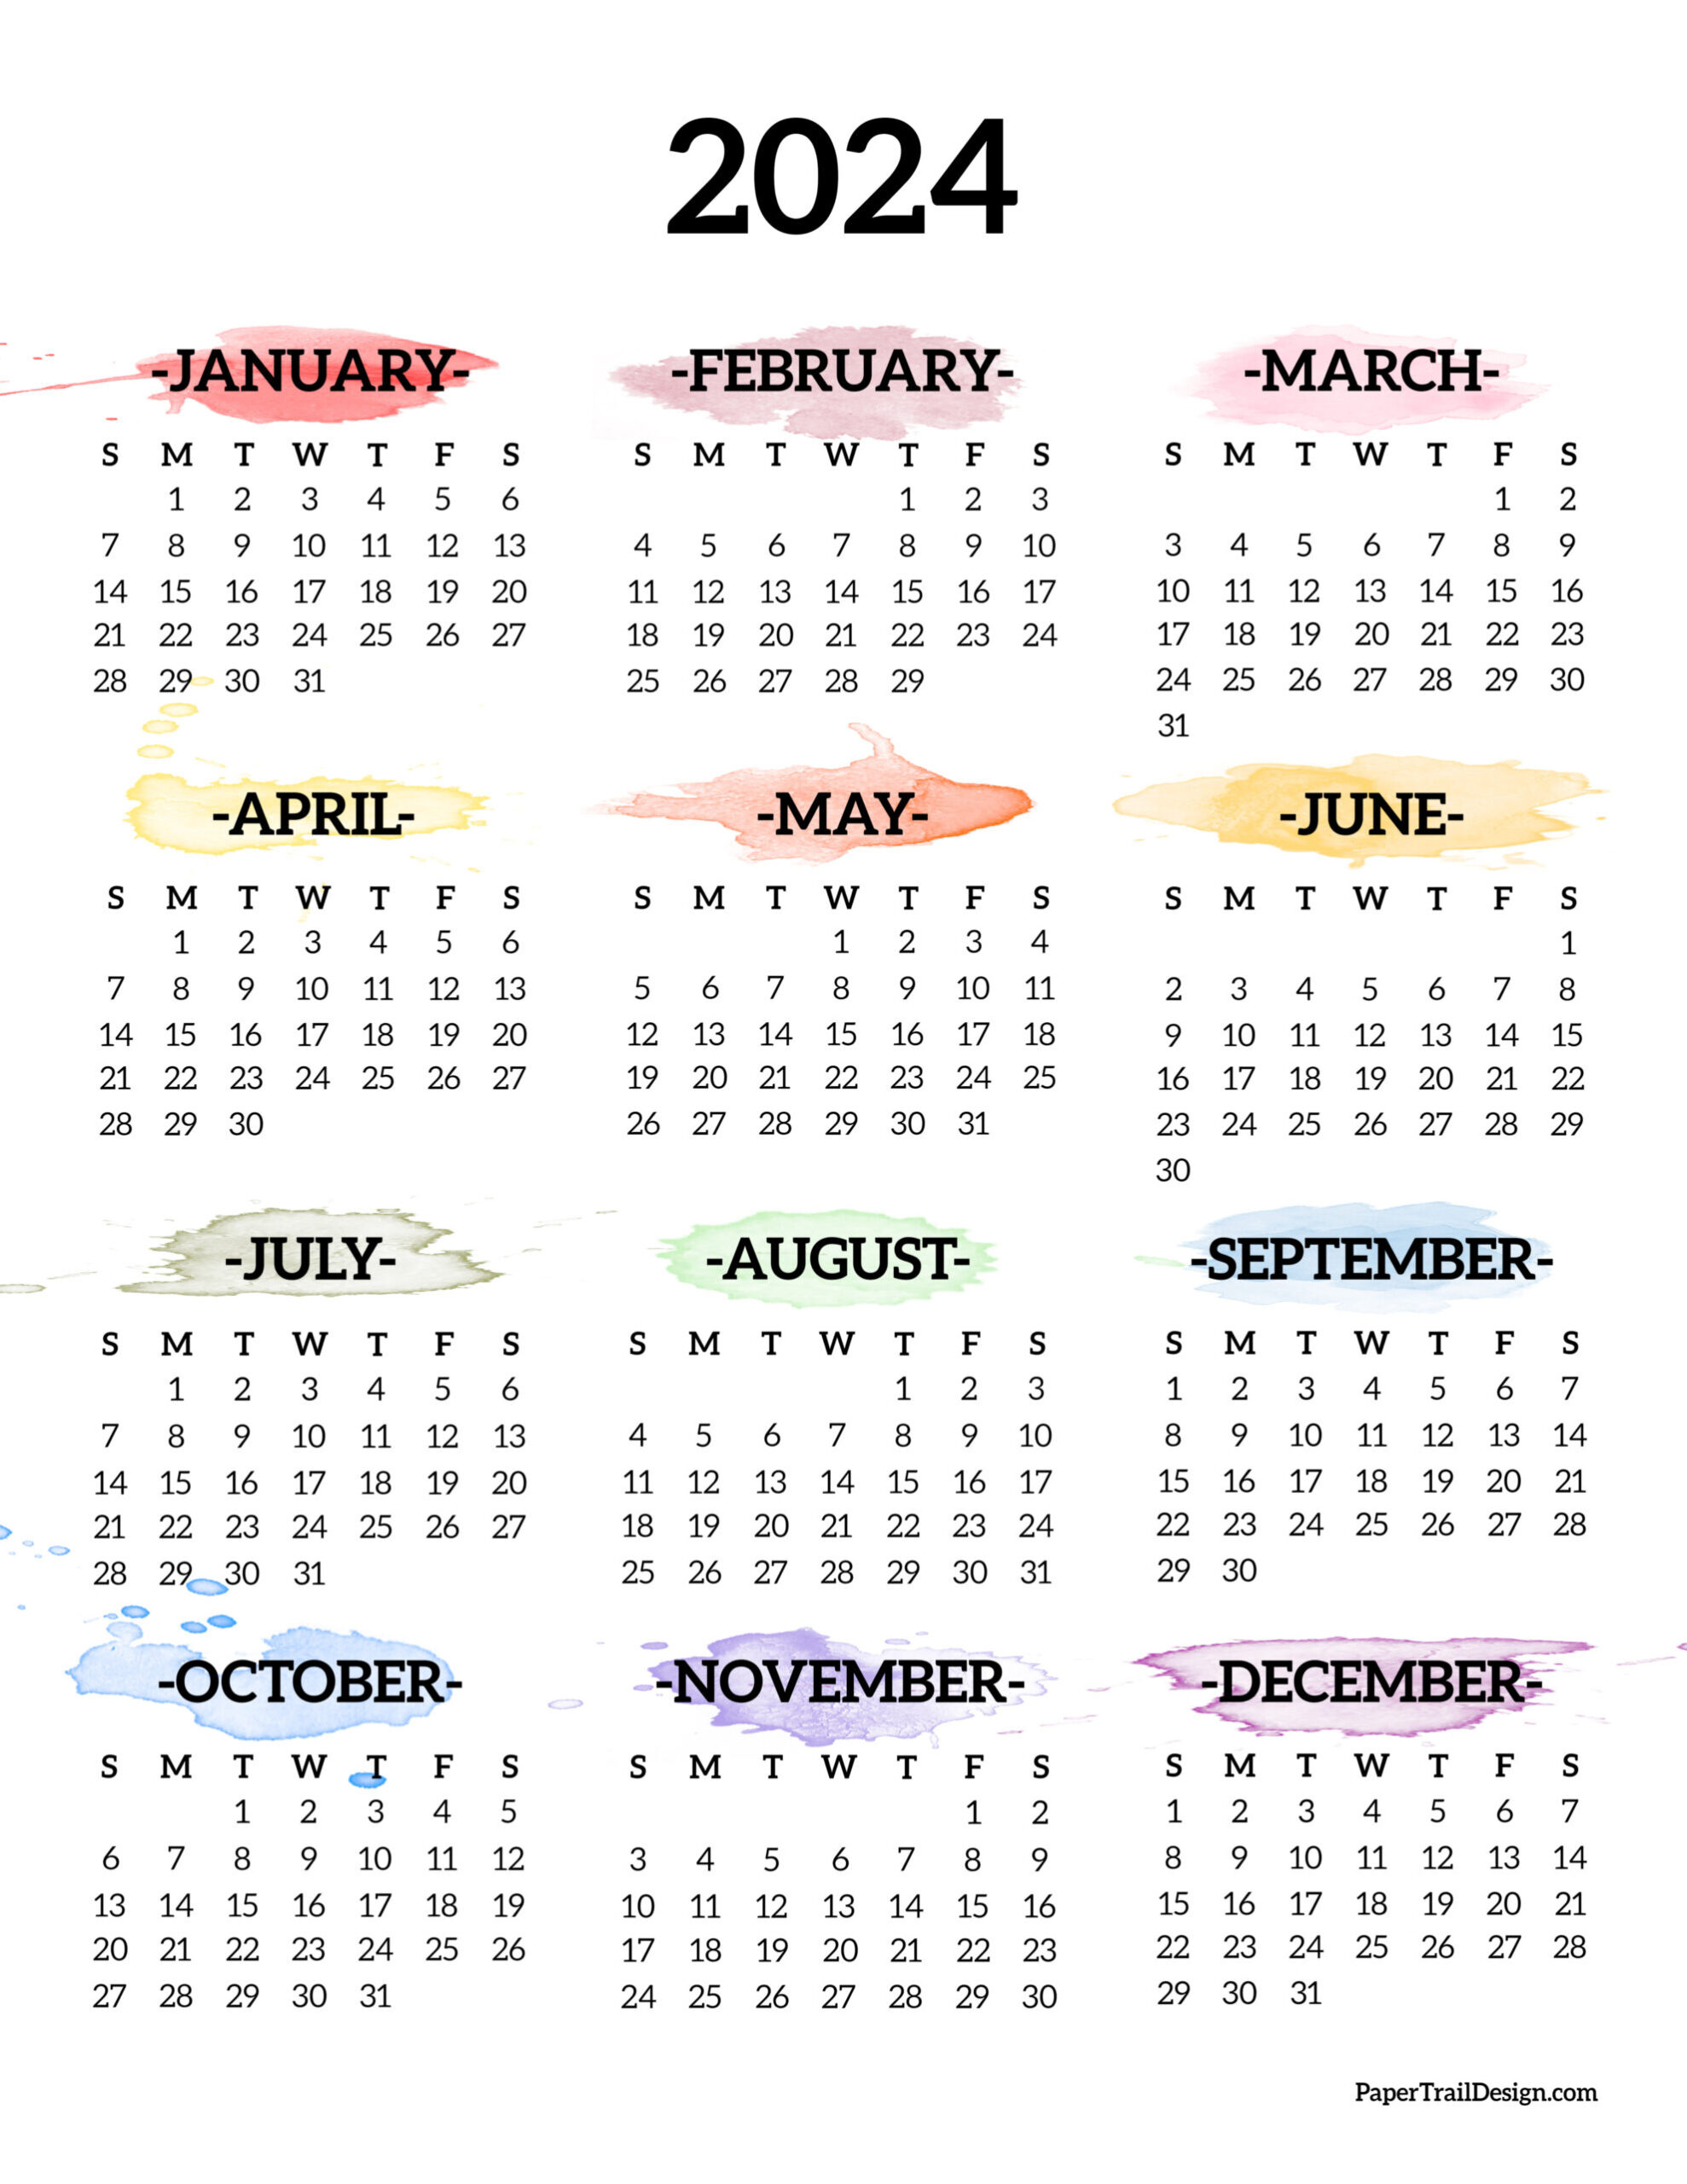 Calendar 2024 Printable One Page - Paper Trail Design | Printable Calendar 2024 Yearly